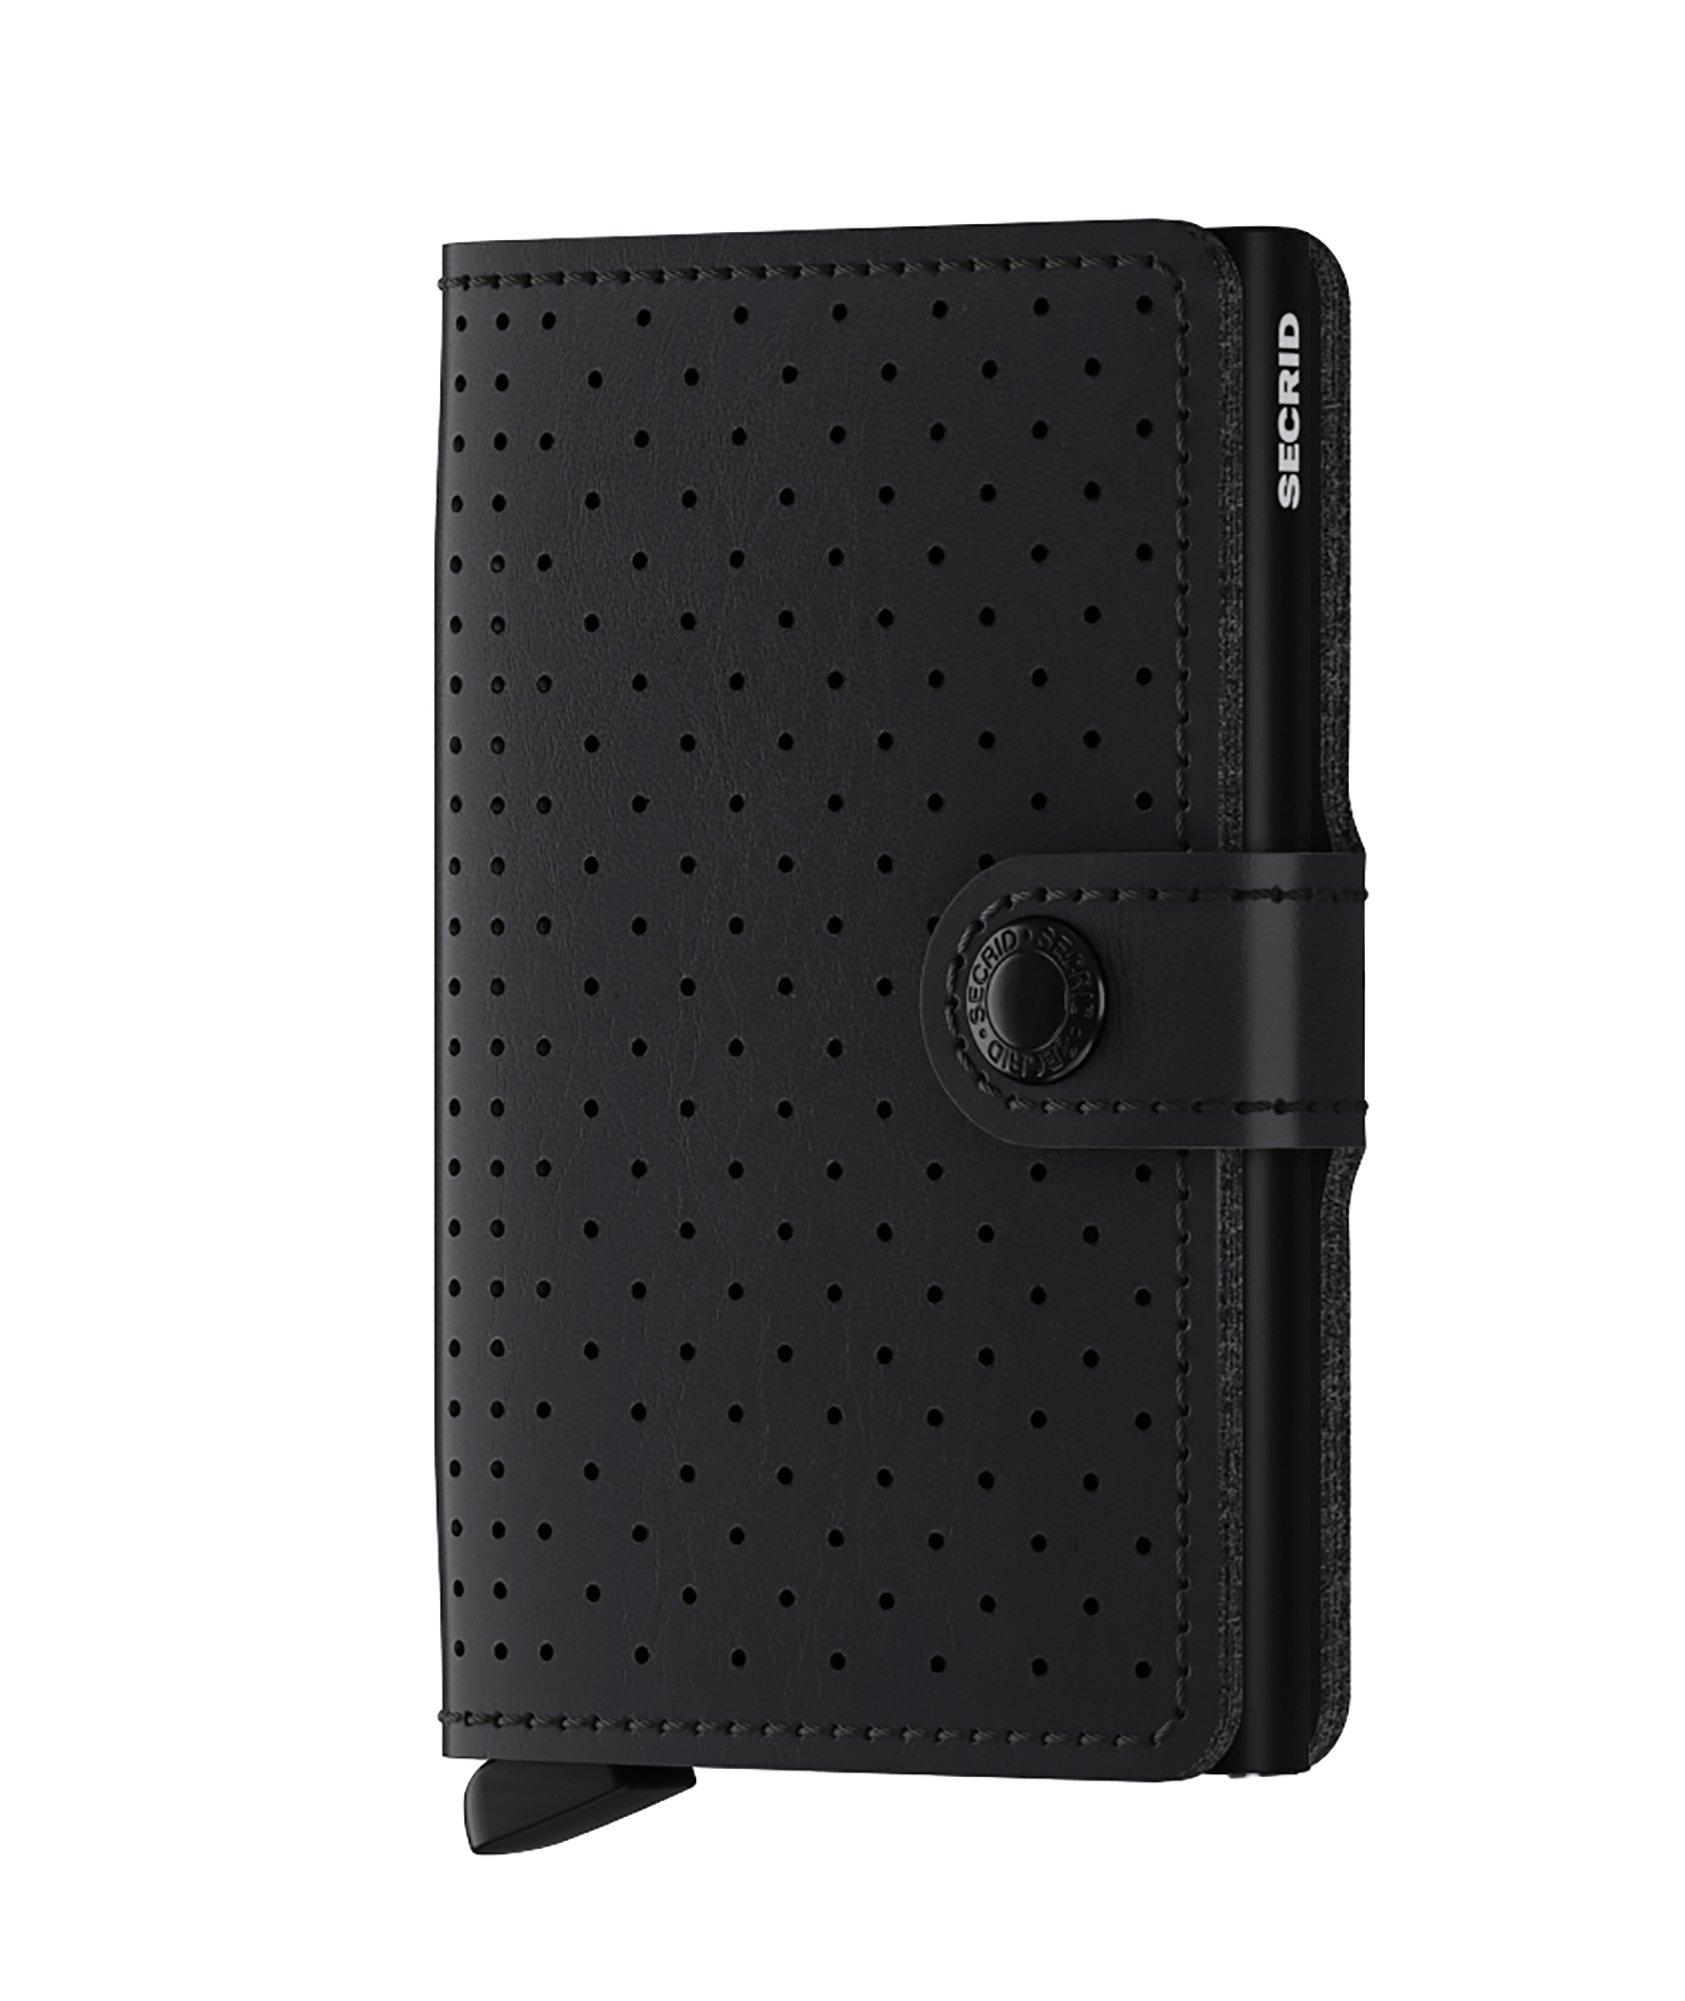 Perforated Leather Miniwallet image 0